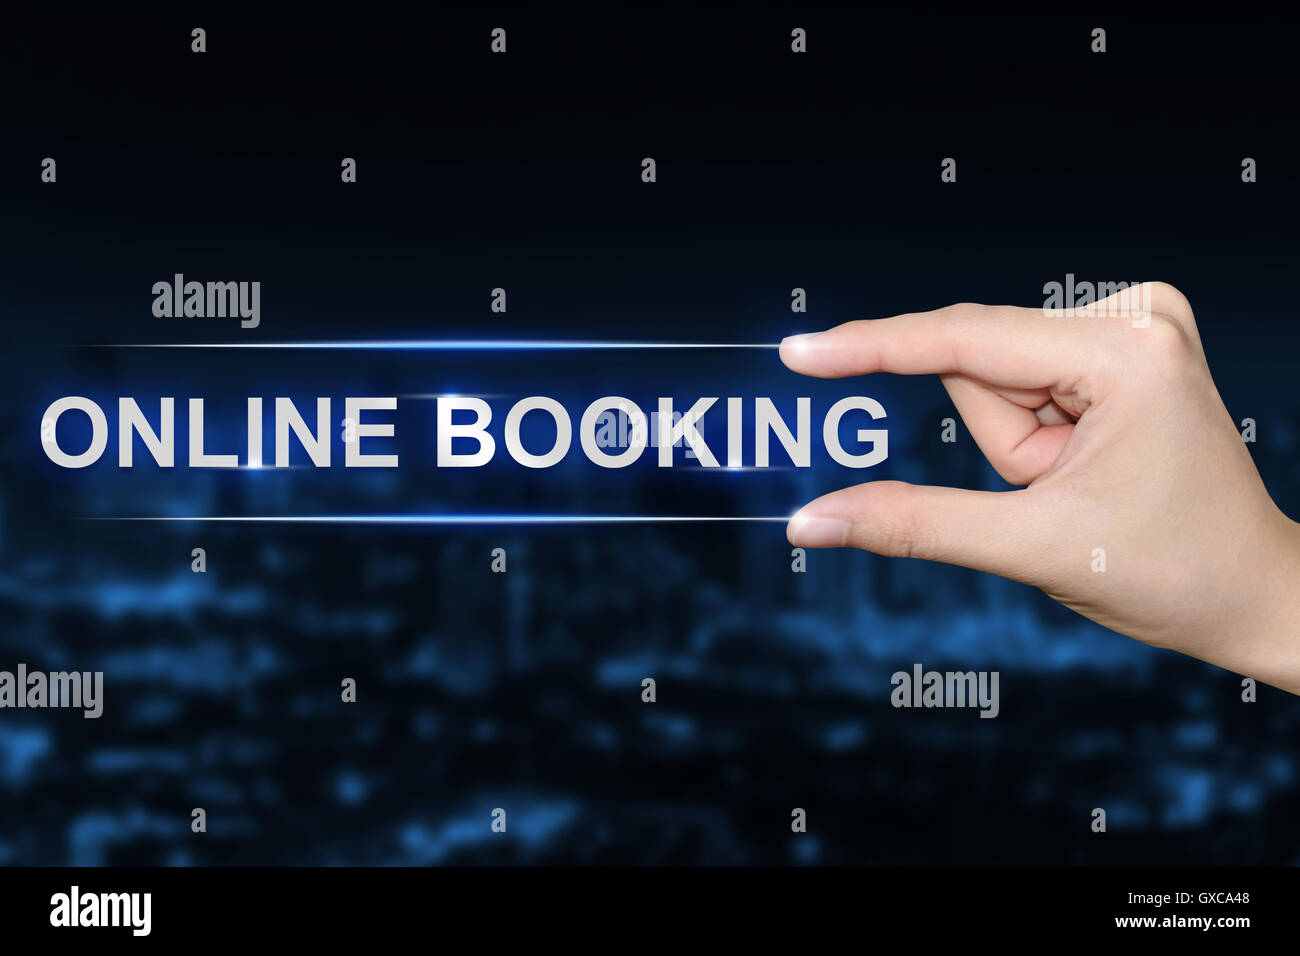 hand pushing online booking button on blurred blue background Stock Photo